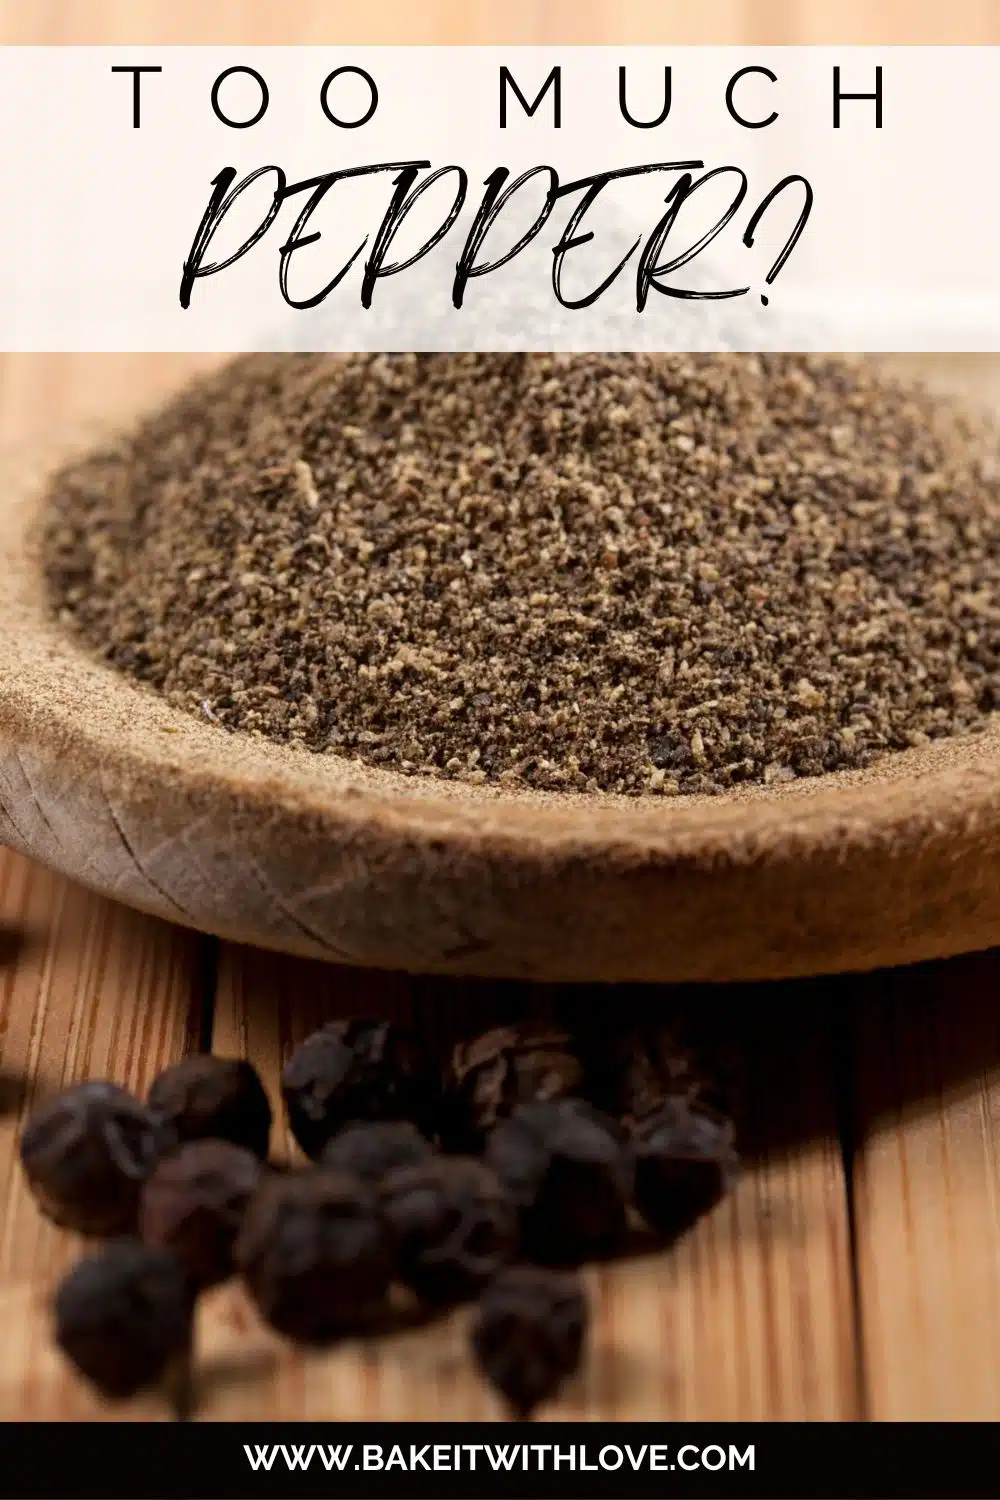 How Do You Neutralize Too Much Pepper?